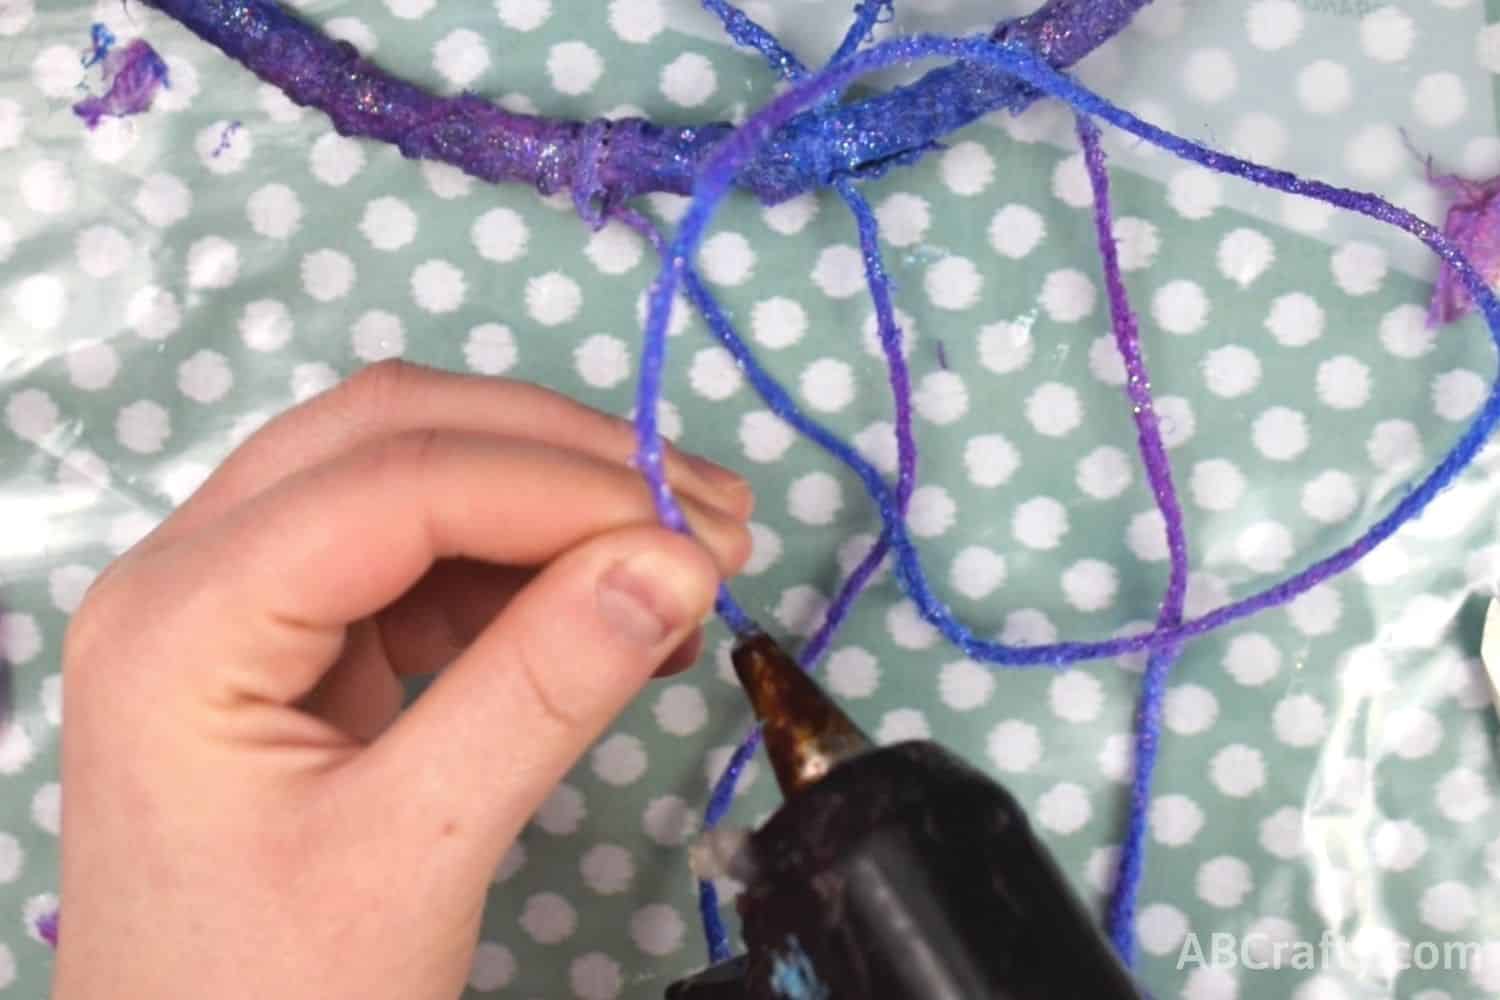 Using glue gun on the end of yarn painted in galaxy colors